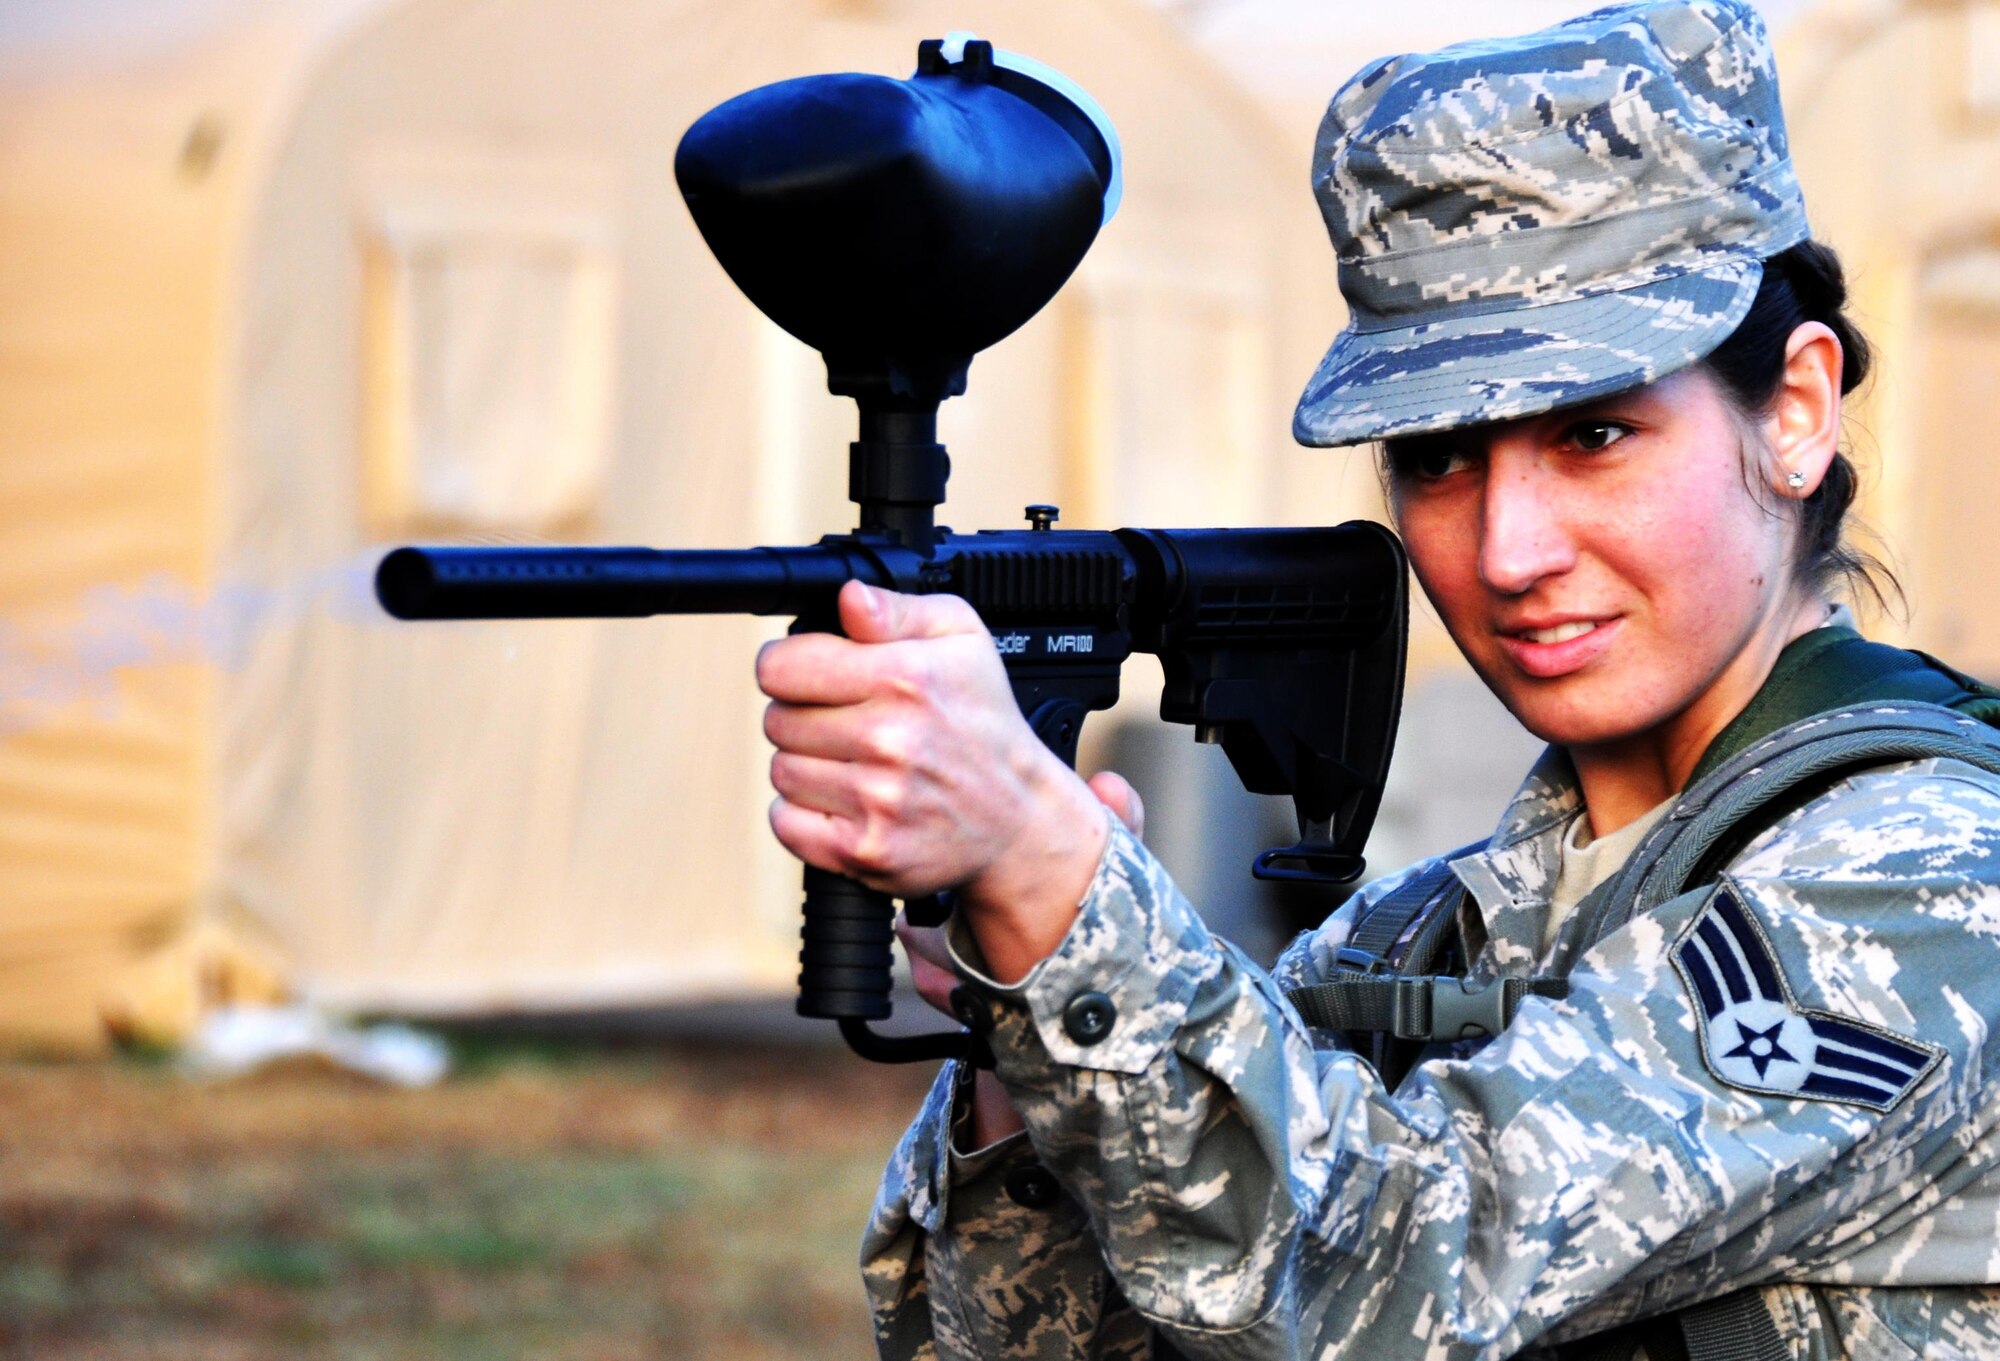 Senior Airman Jessica McMillan, 445th Force Support Squadron at Wright Patterson Air Force Base, Ohio, fires a paintball gun at a target for the scavenger hunt portion of the Readiness Challenge for Force Support Silver Flag at Dobbins Air Reserve Base, Georgia, March 12, 2015. The numbers hit on the target represent how many push-ups her team would have to complete before receiving their next clue. (U.S. Air Force photo/Senior Airman Daniel Phelps)